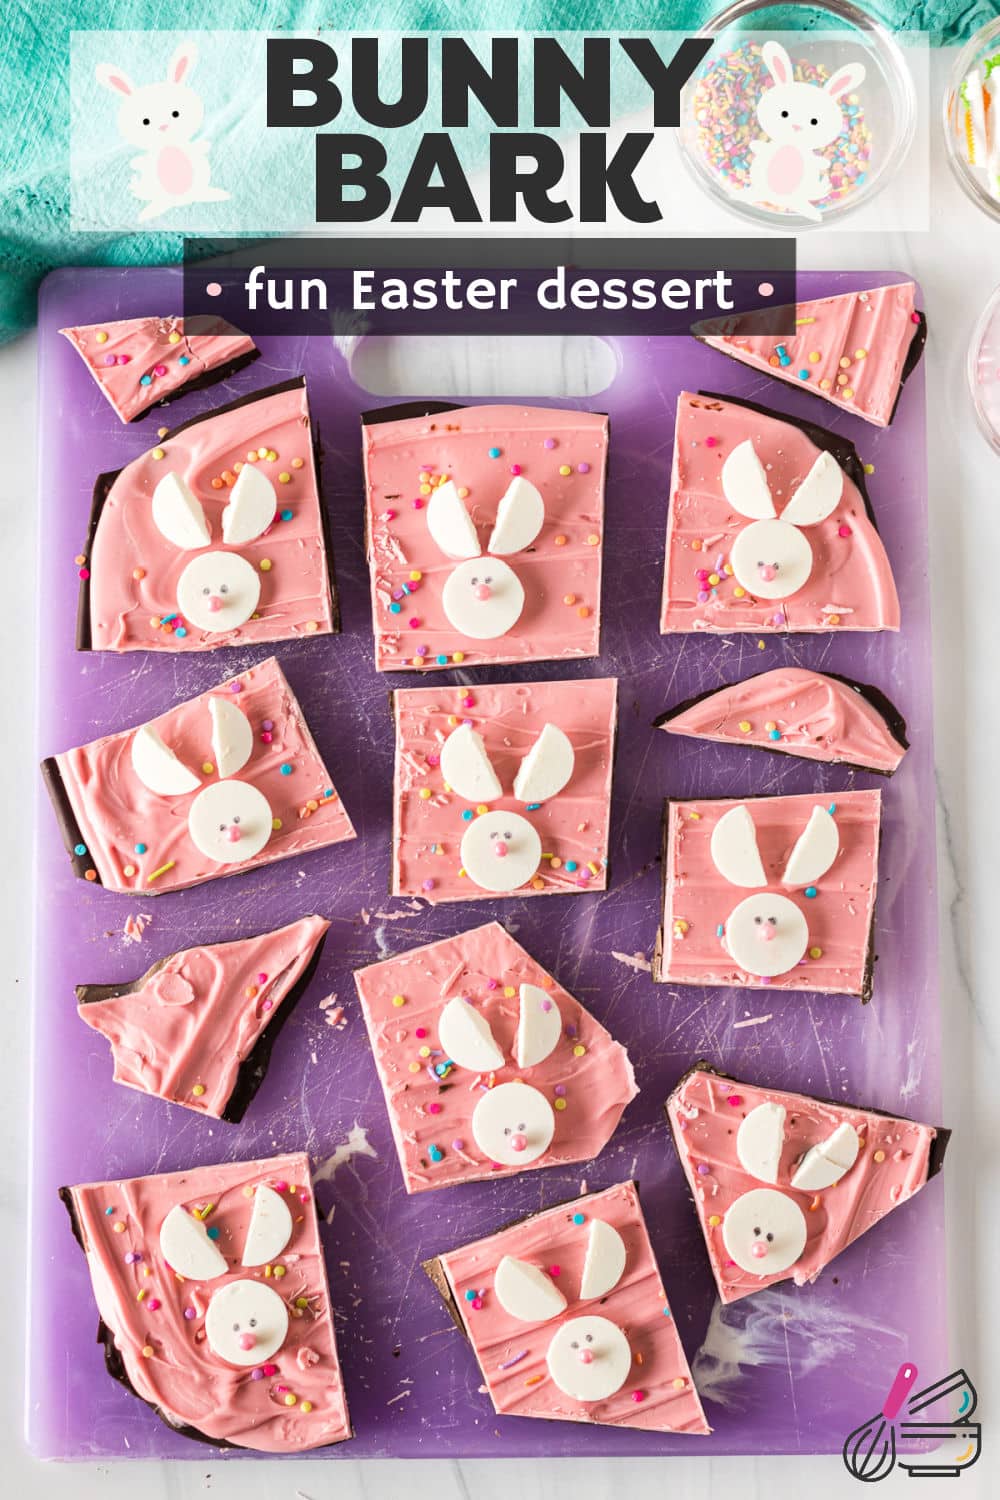 Easy bunny bark is a festive, no-bake Easter treat that starts with a layer of chocolate, topped with a layer of melted pink candy wafers, and decorated with bunnies made out of white candy melts with pastel-colored pearl sprinkle noses. | www.persnicketyplates.com